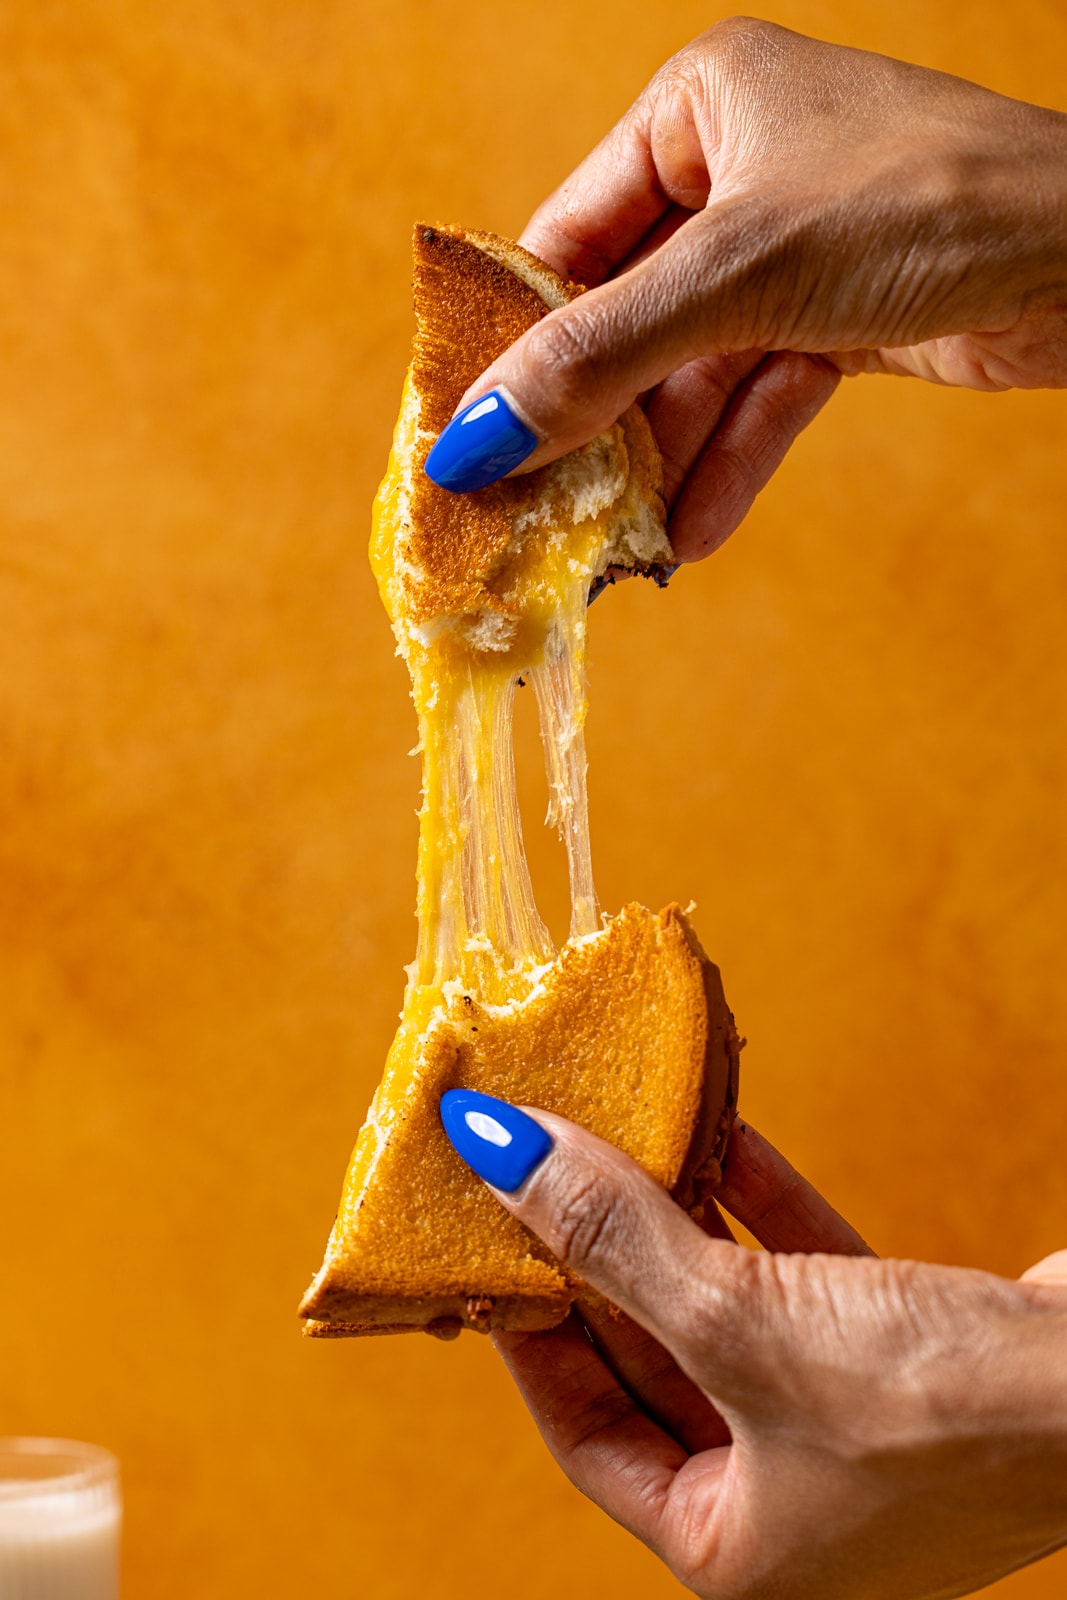 Grilled cheese being pulled apart held in hand.